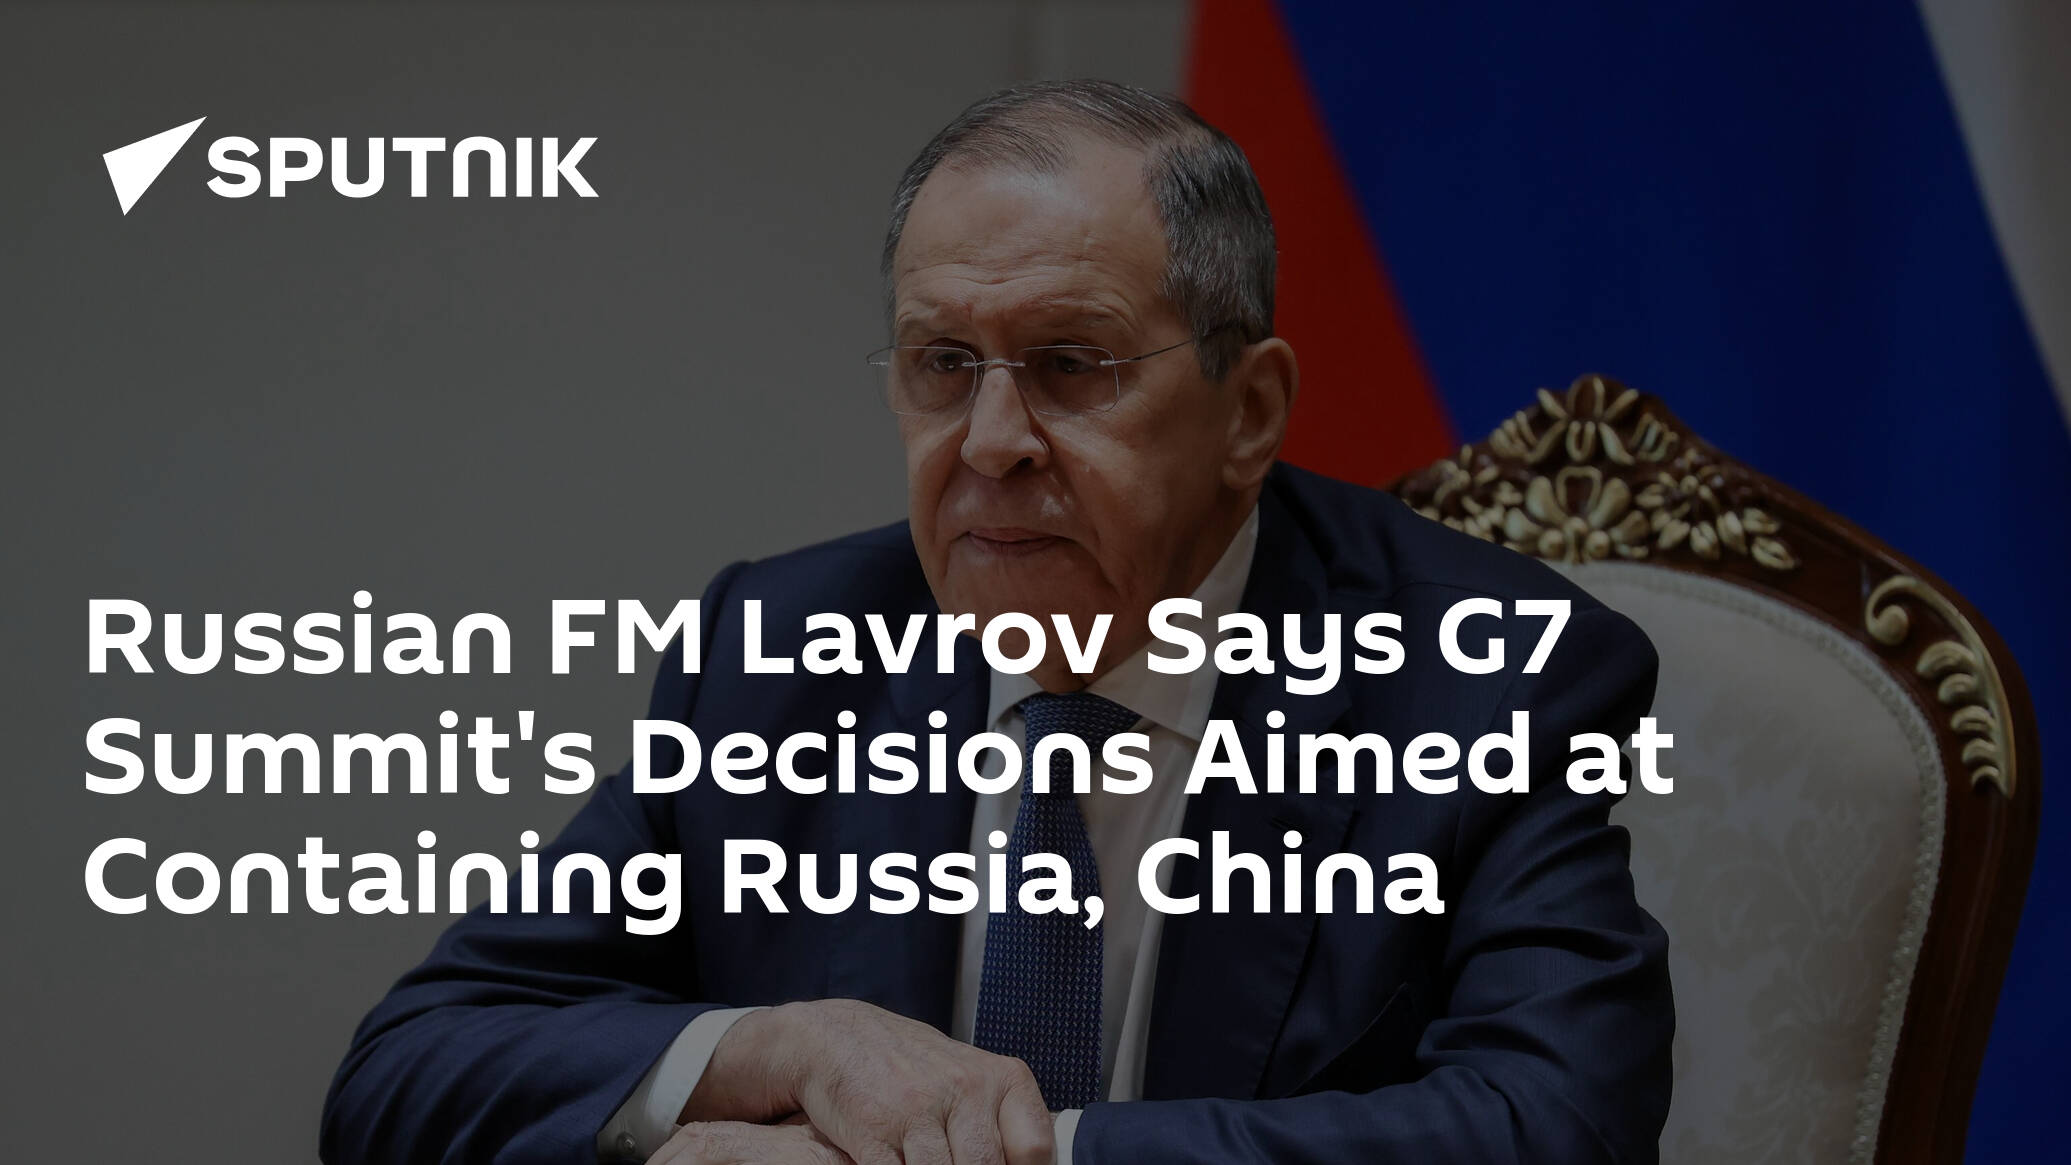 Russian FM Lavrov Says G7 Summit's Decisions Aimed at Containing Russia, China